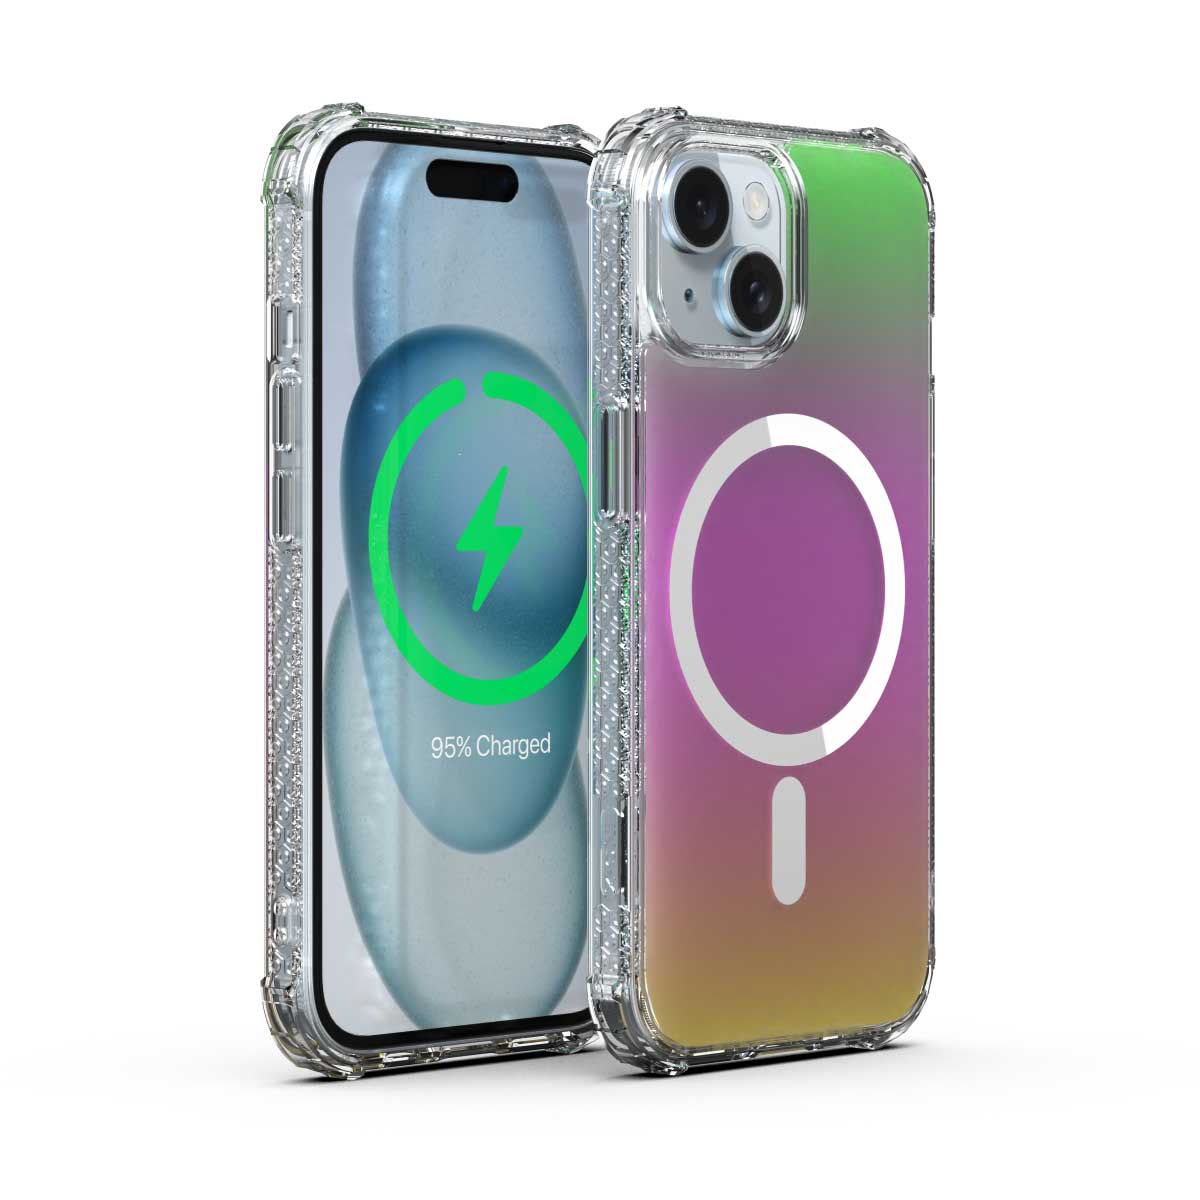 X.One® Dropguard Pro Hologram (Magsafe Edition) Impact Protection Case for iPhone 15/14 series